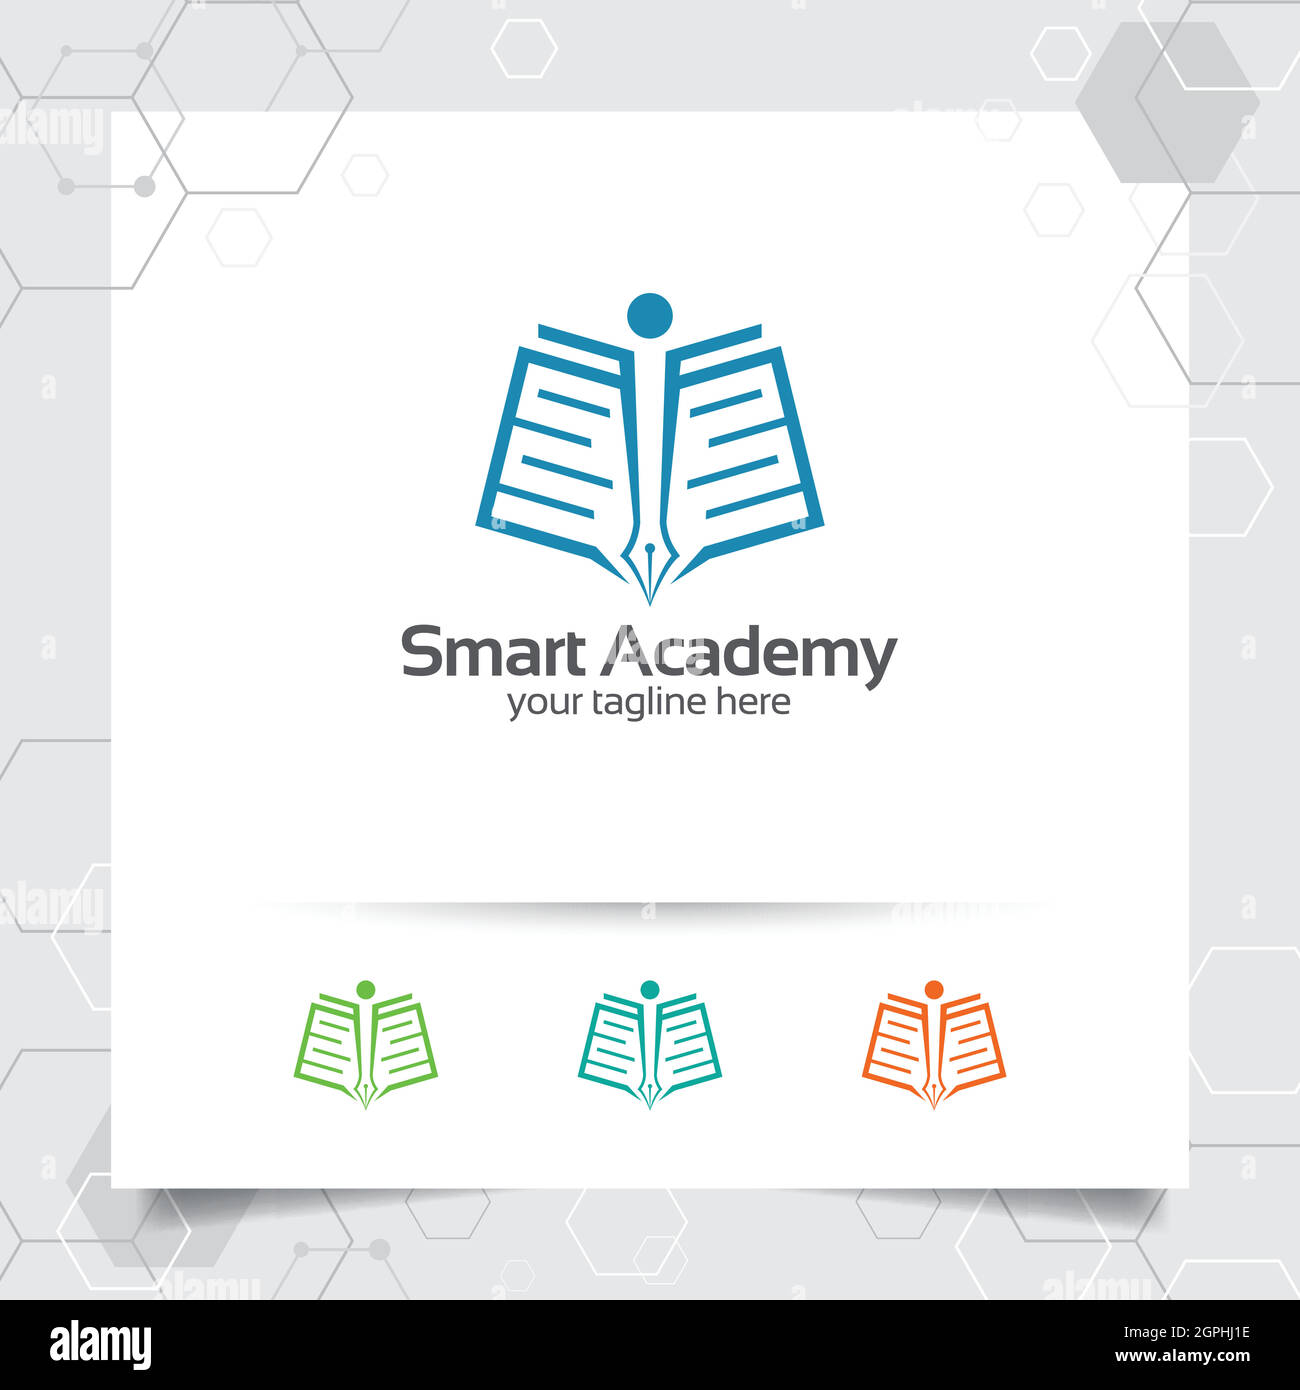 Education logo vector design with concept of book, pen, and people icon illustration for academy, university, school. Stock Vector